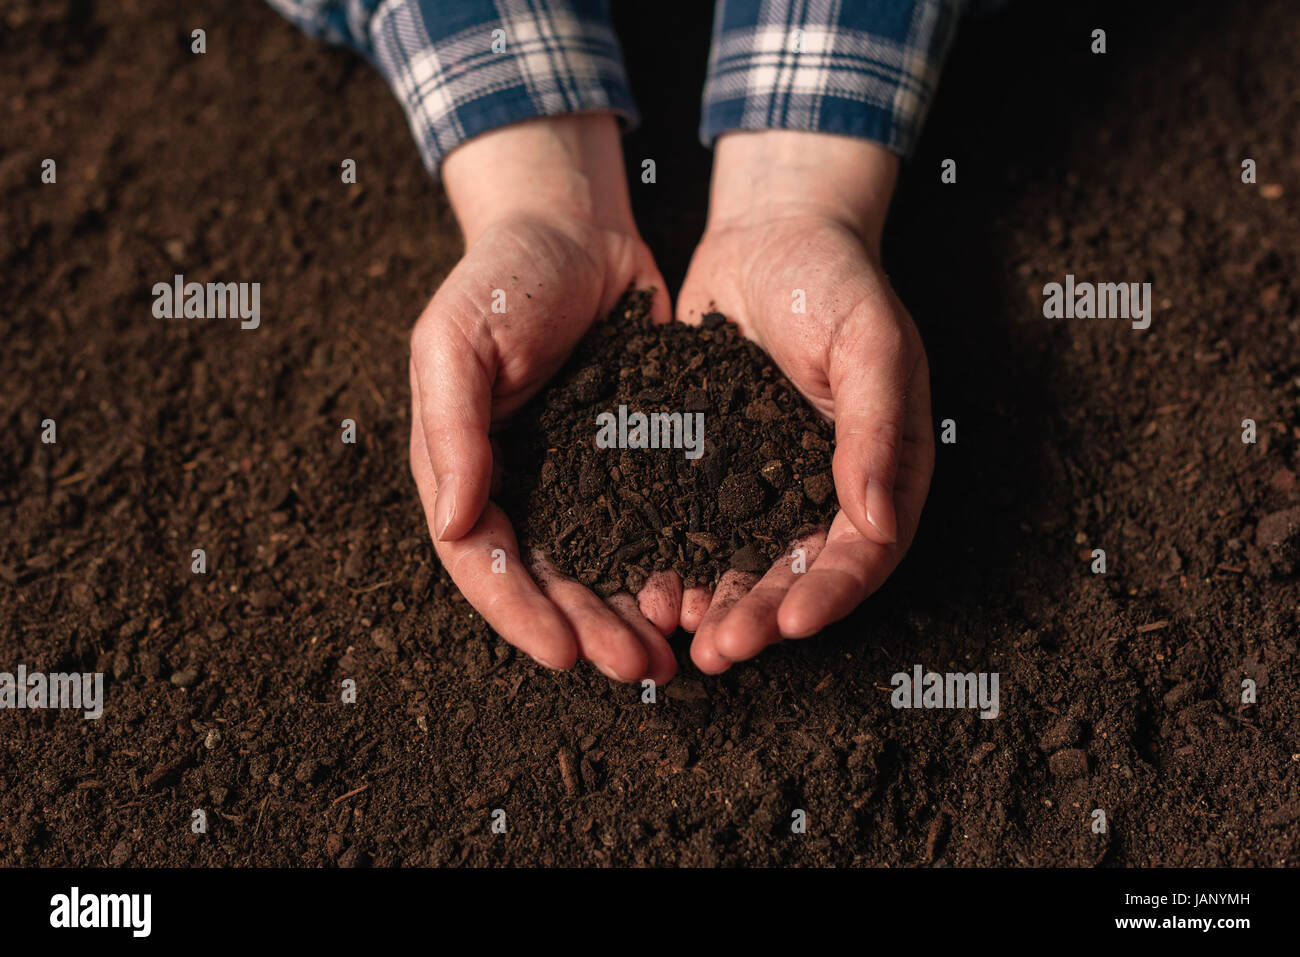 Soil fertility analysis as agricultural activity, female farmer holding arable ploughed dirt in cupped hands Stock Photo